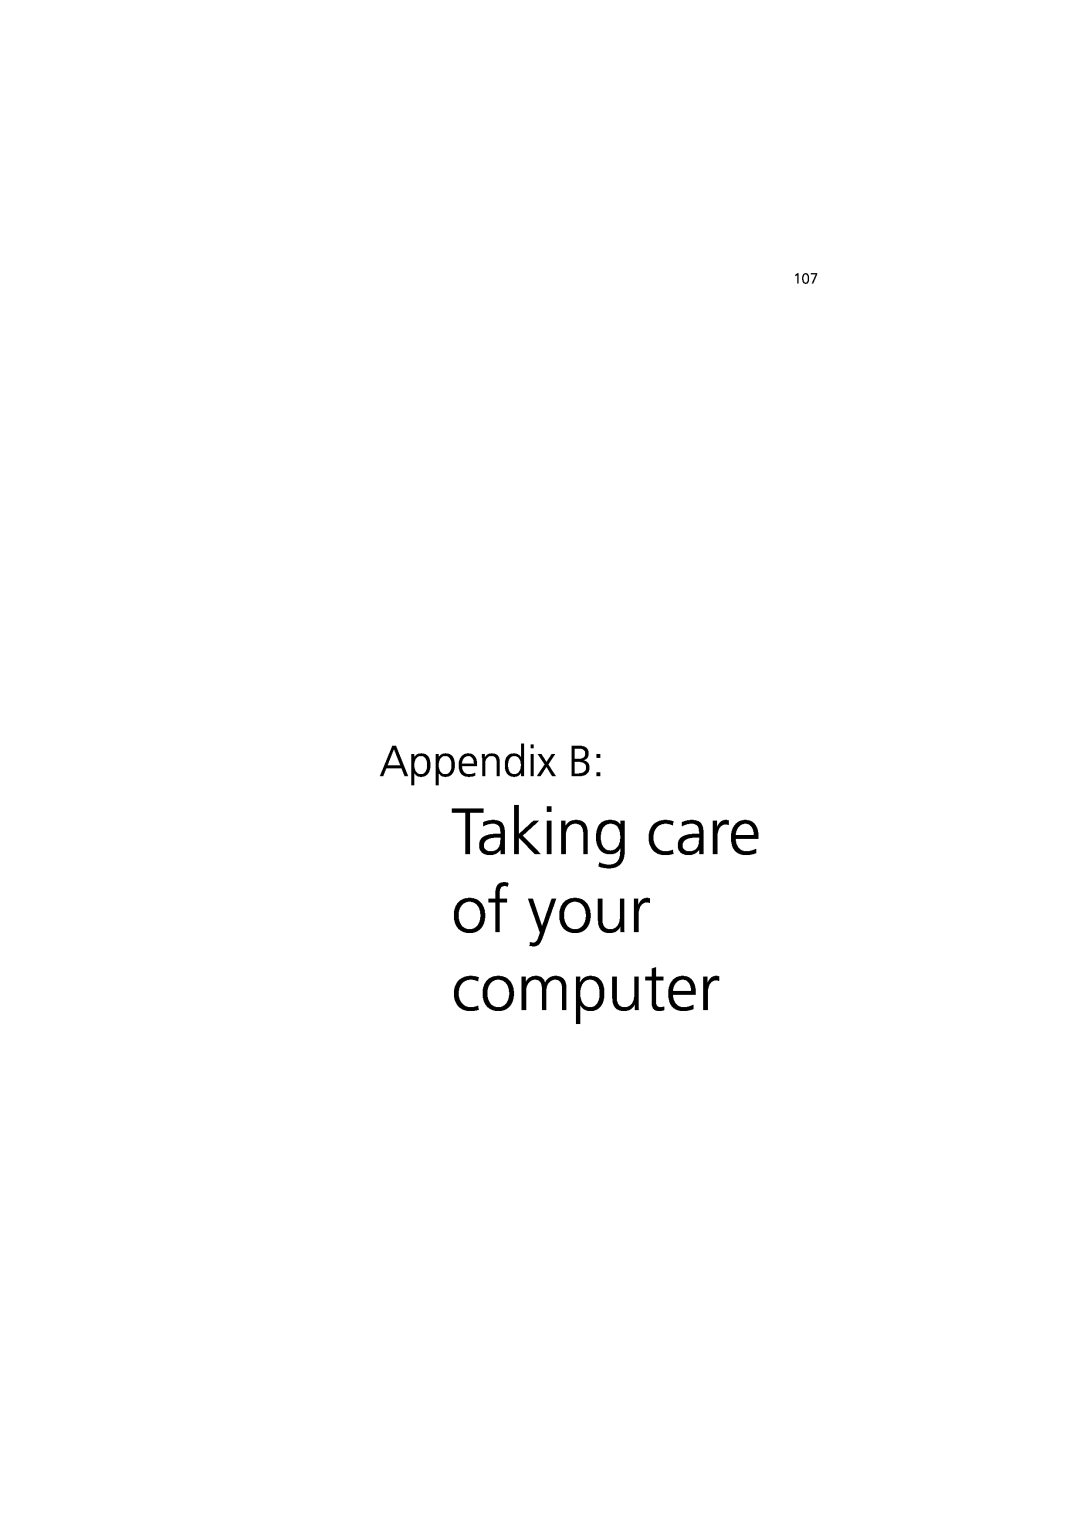 Acer 7600 manual Appendix B, Taking care of your computer 